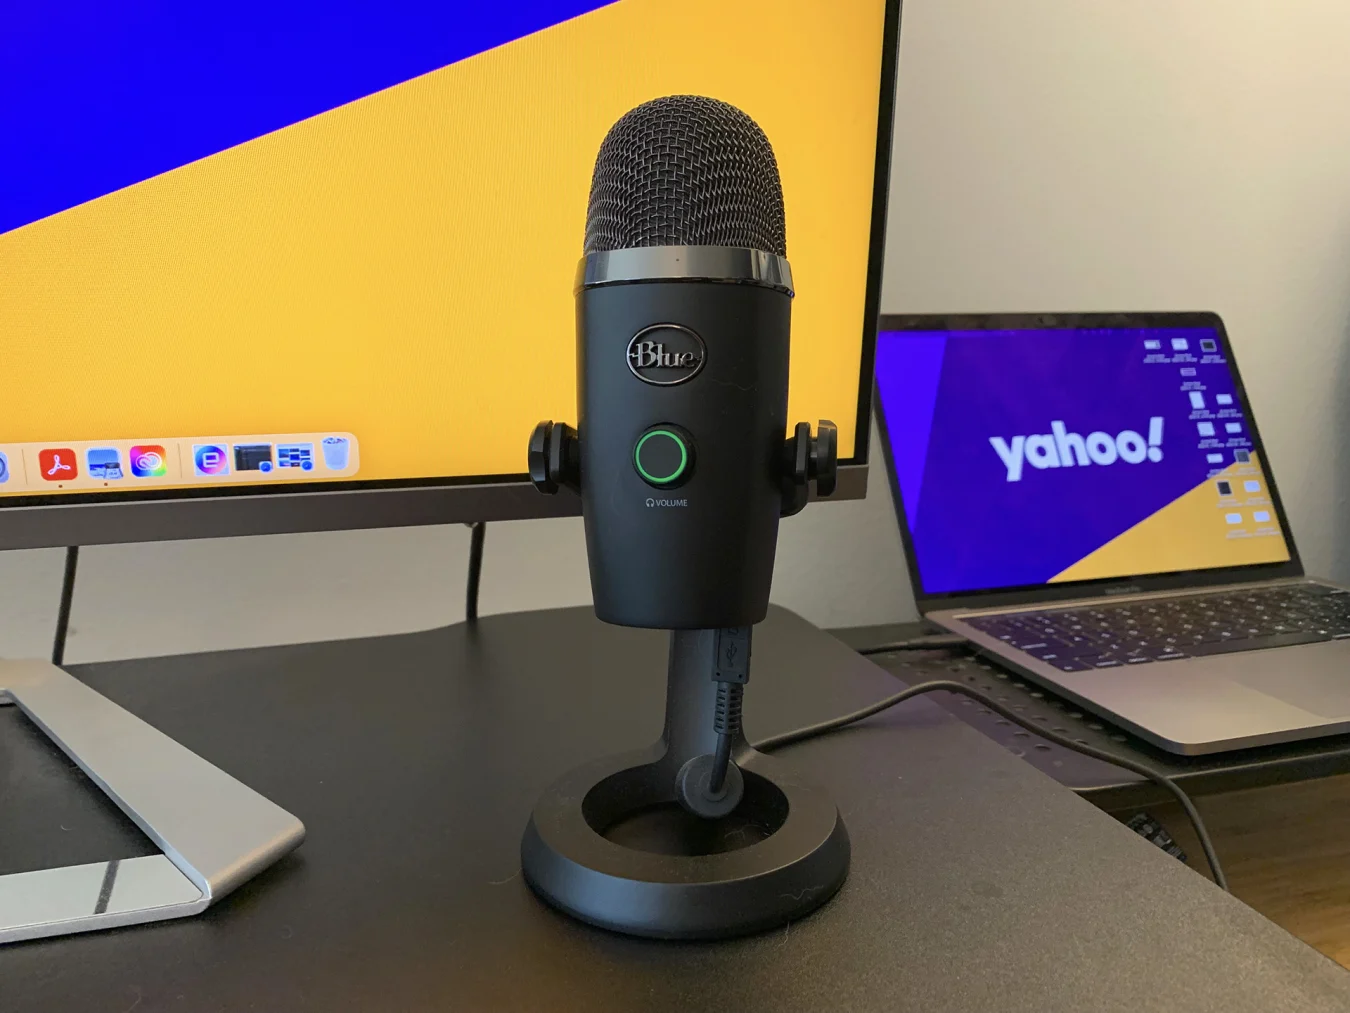 The Blue Yeti Nano microphone on a black desk riser in front of a laptop and a computer monitor.